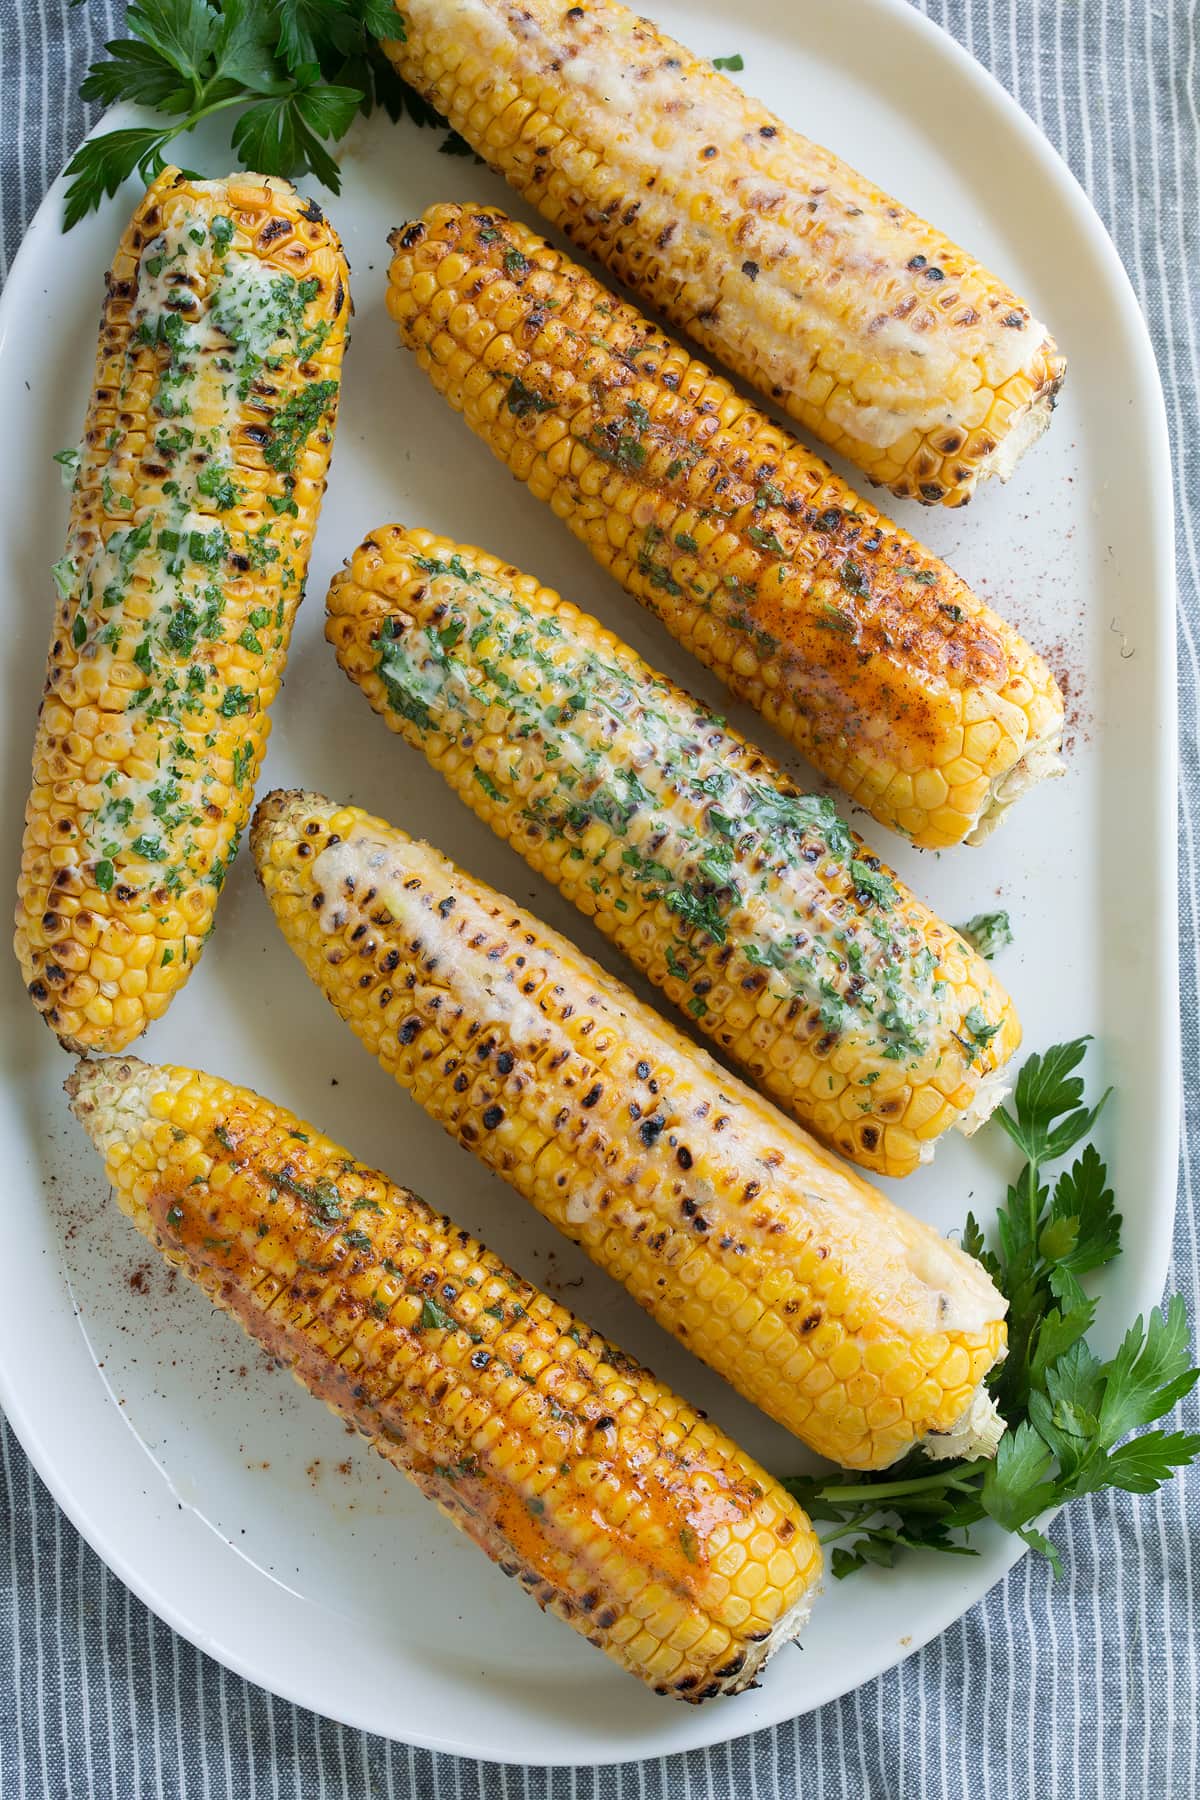 Six grilled corn on the cob rubbed with flavored butters.